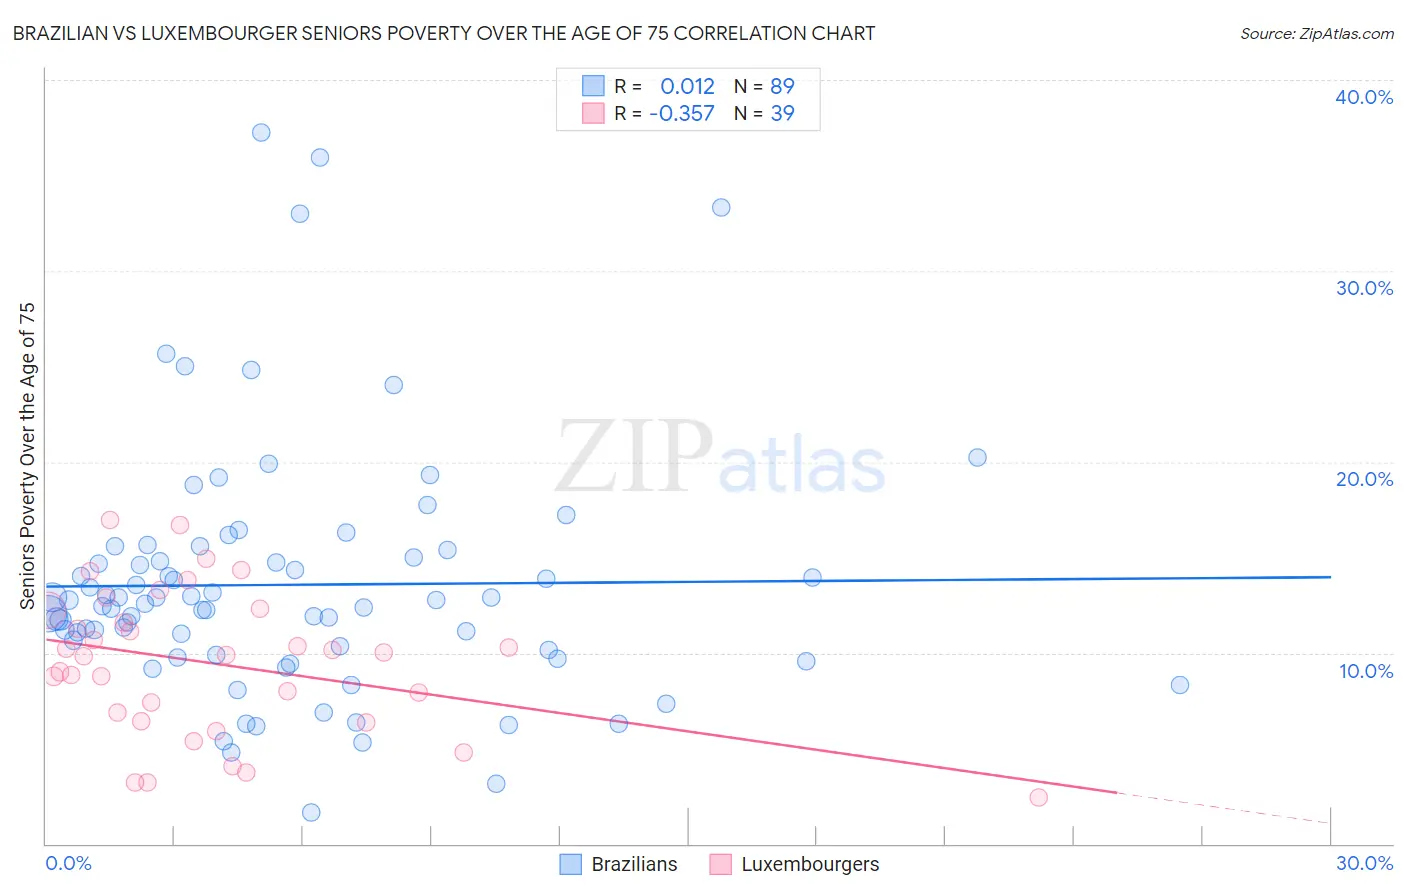 Brazilian vs Luxembourger Seniors Poverty Over the Age of 75